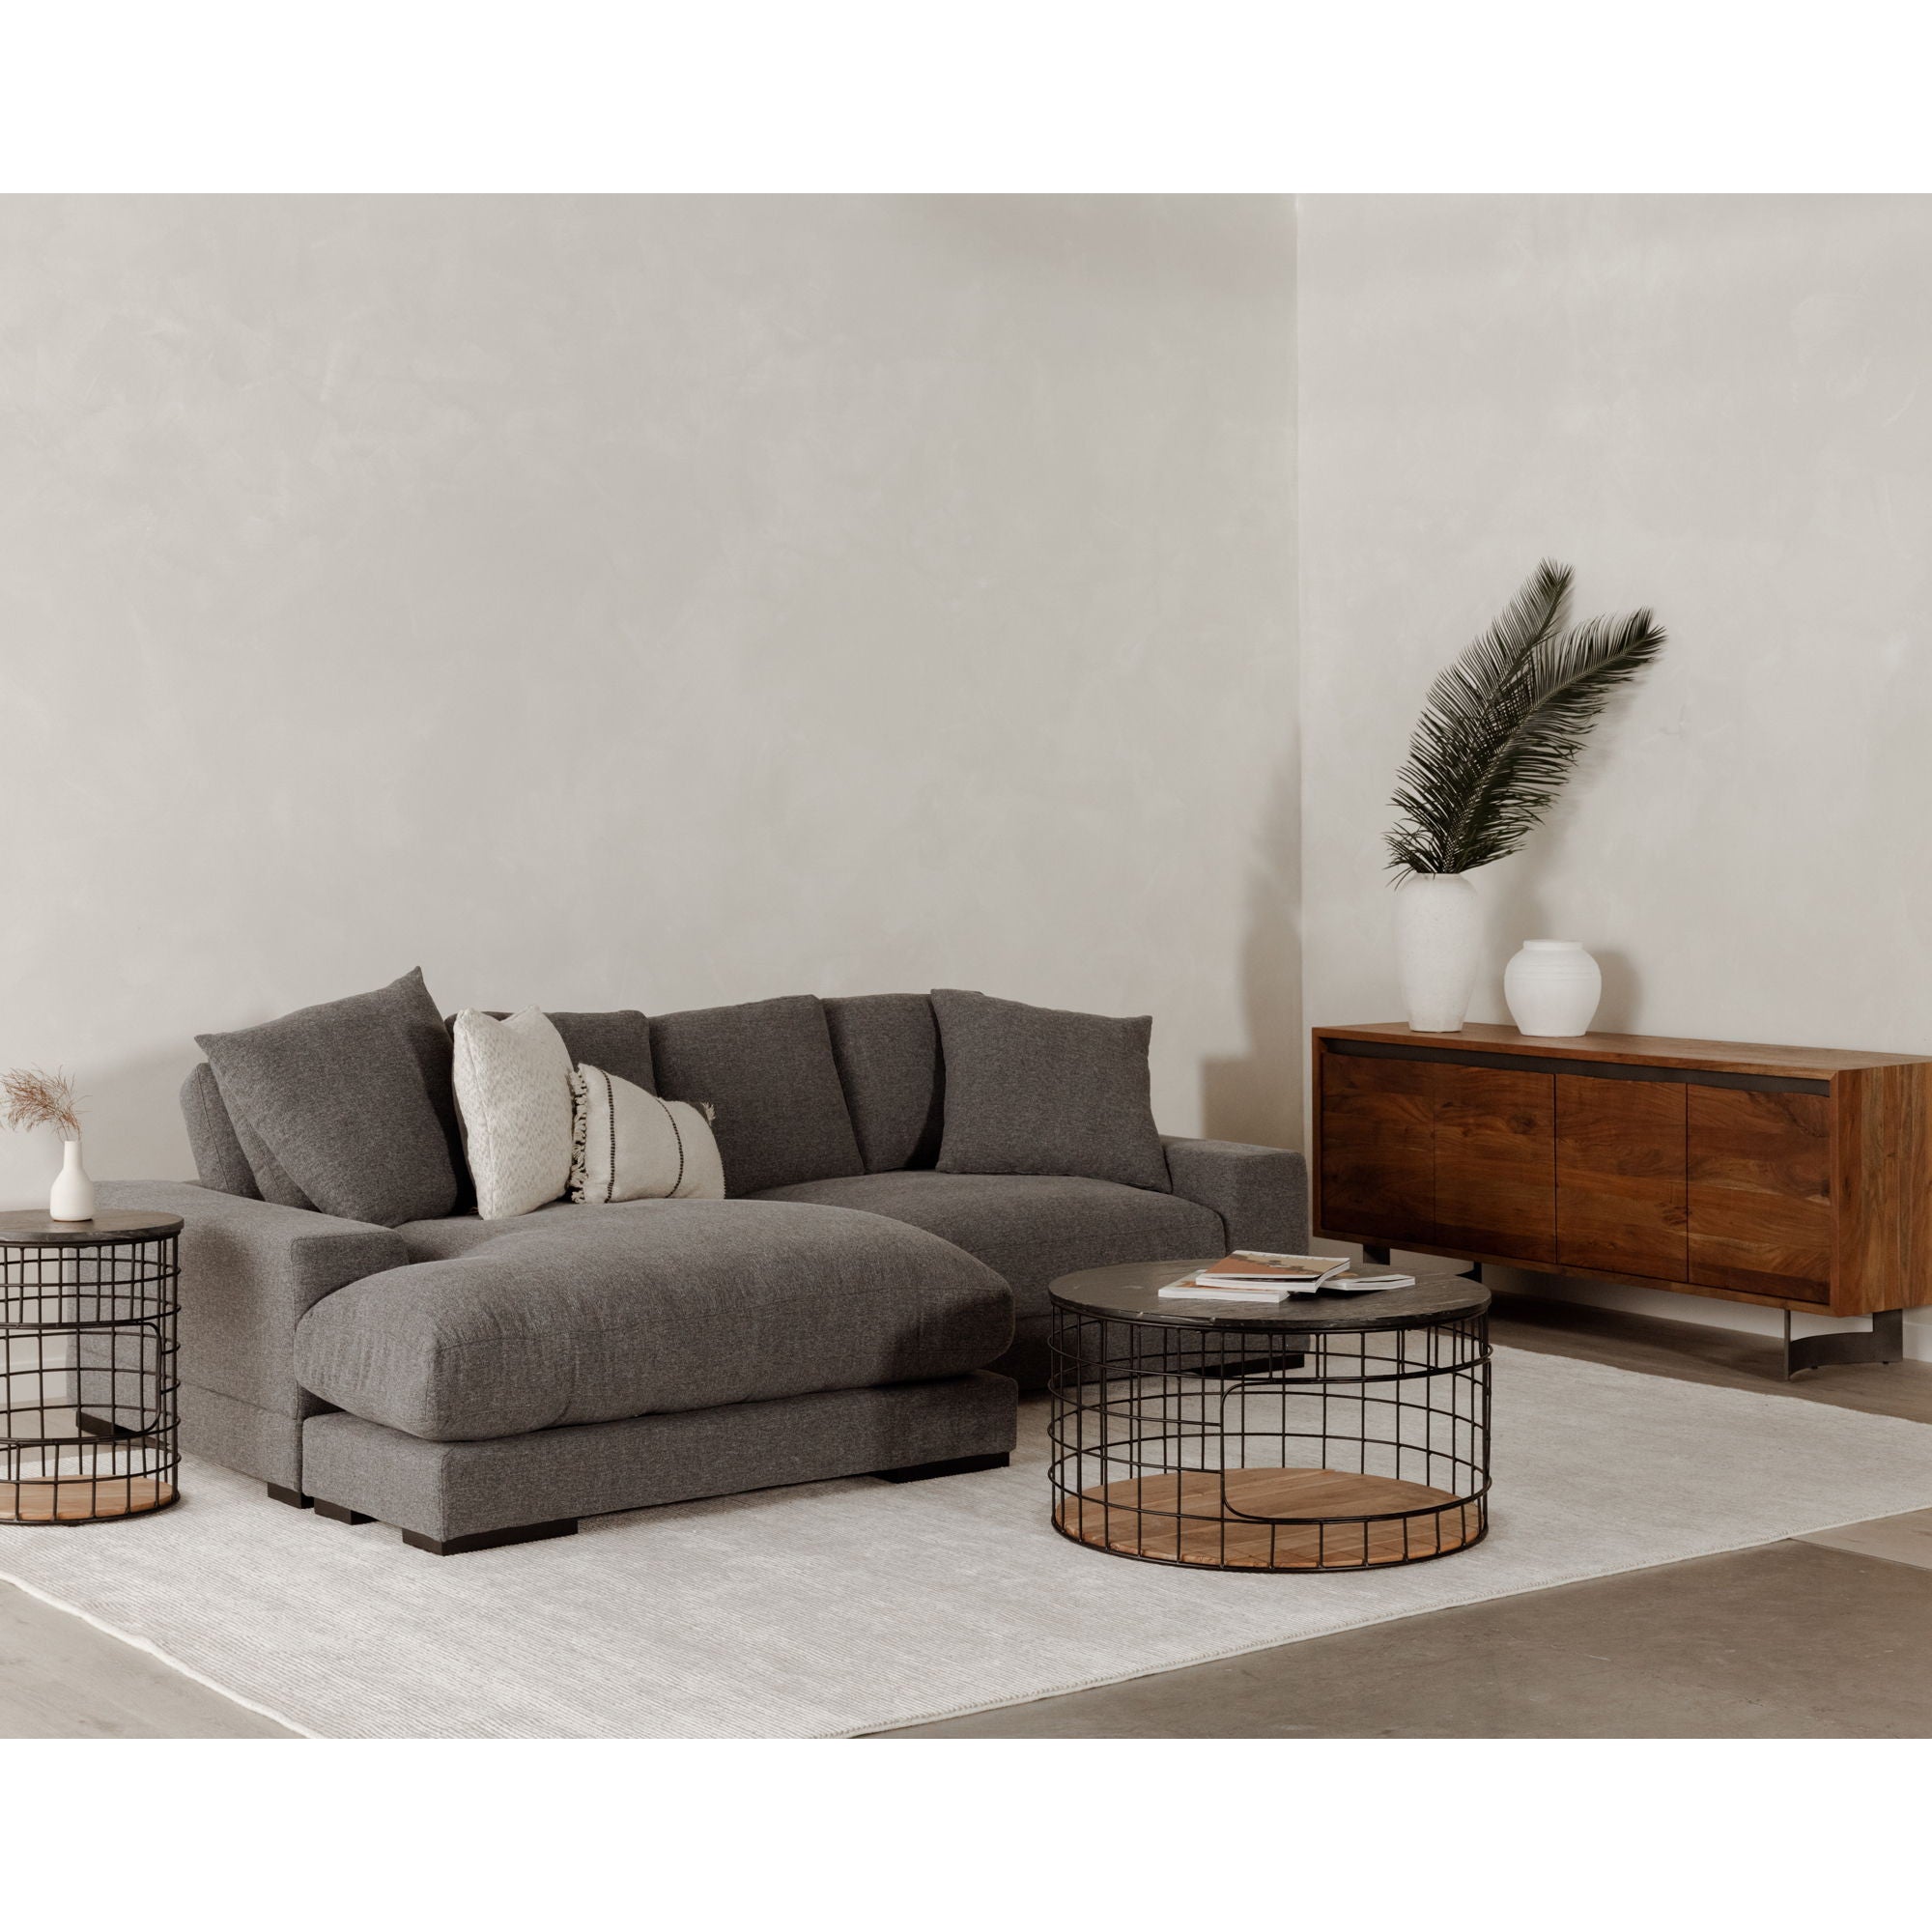 Plunge Grey Sectional - Plush Cushions-Stationary Sectionals-American Furniture Outlet